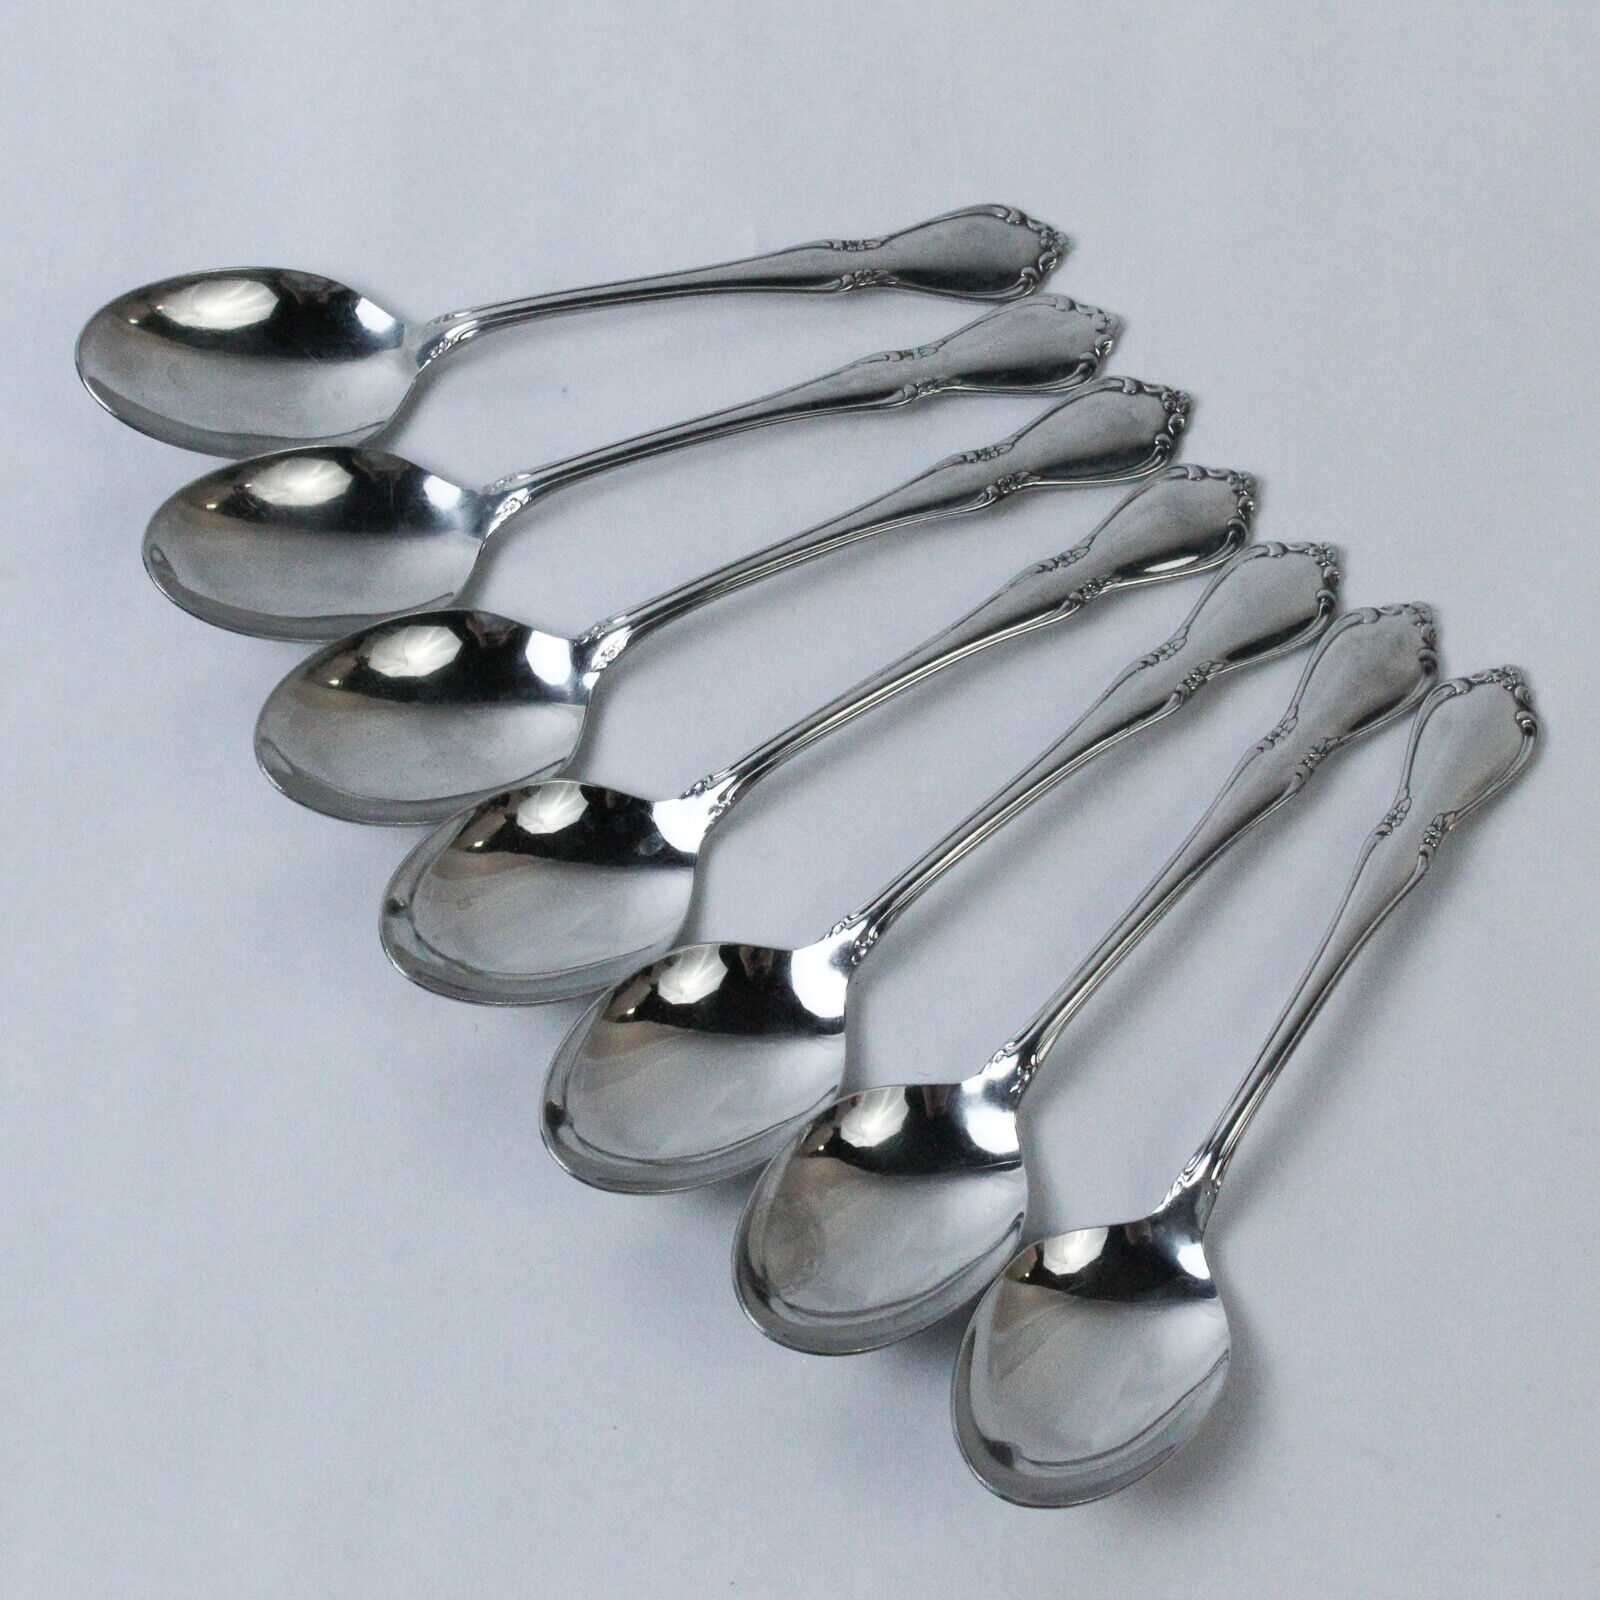 Lot of 7 Oneida Craft Deluxe Celebrity Stainless Tablespoons Kitchen